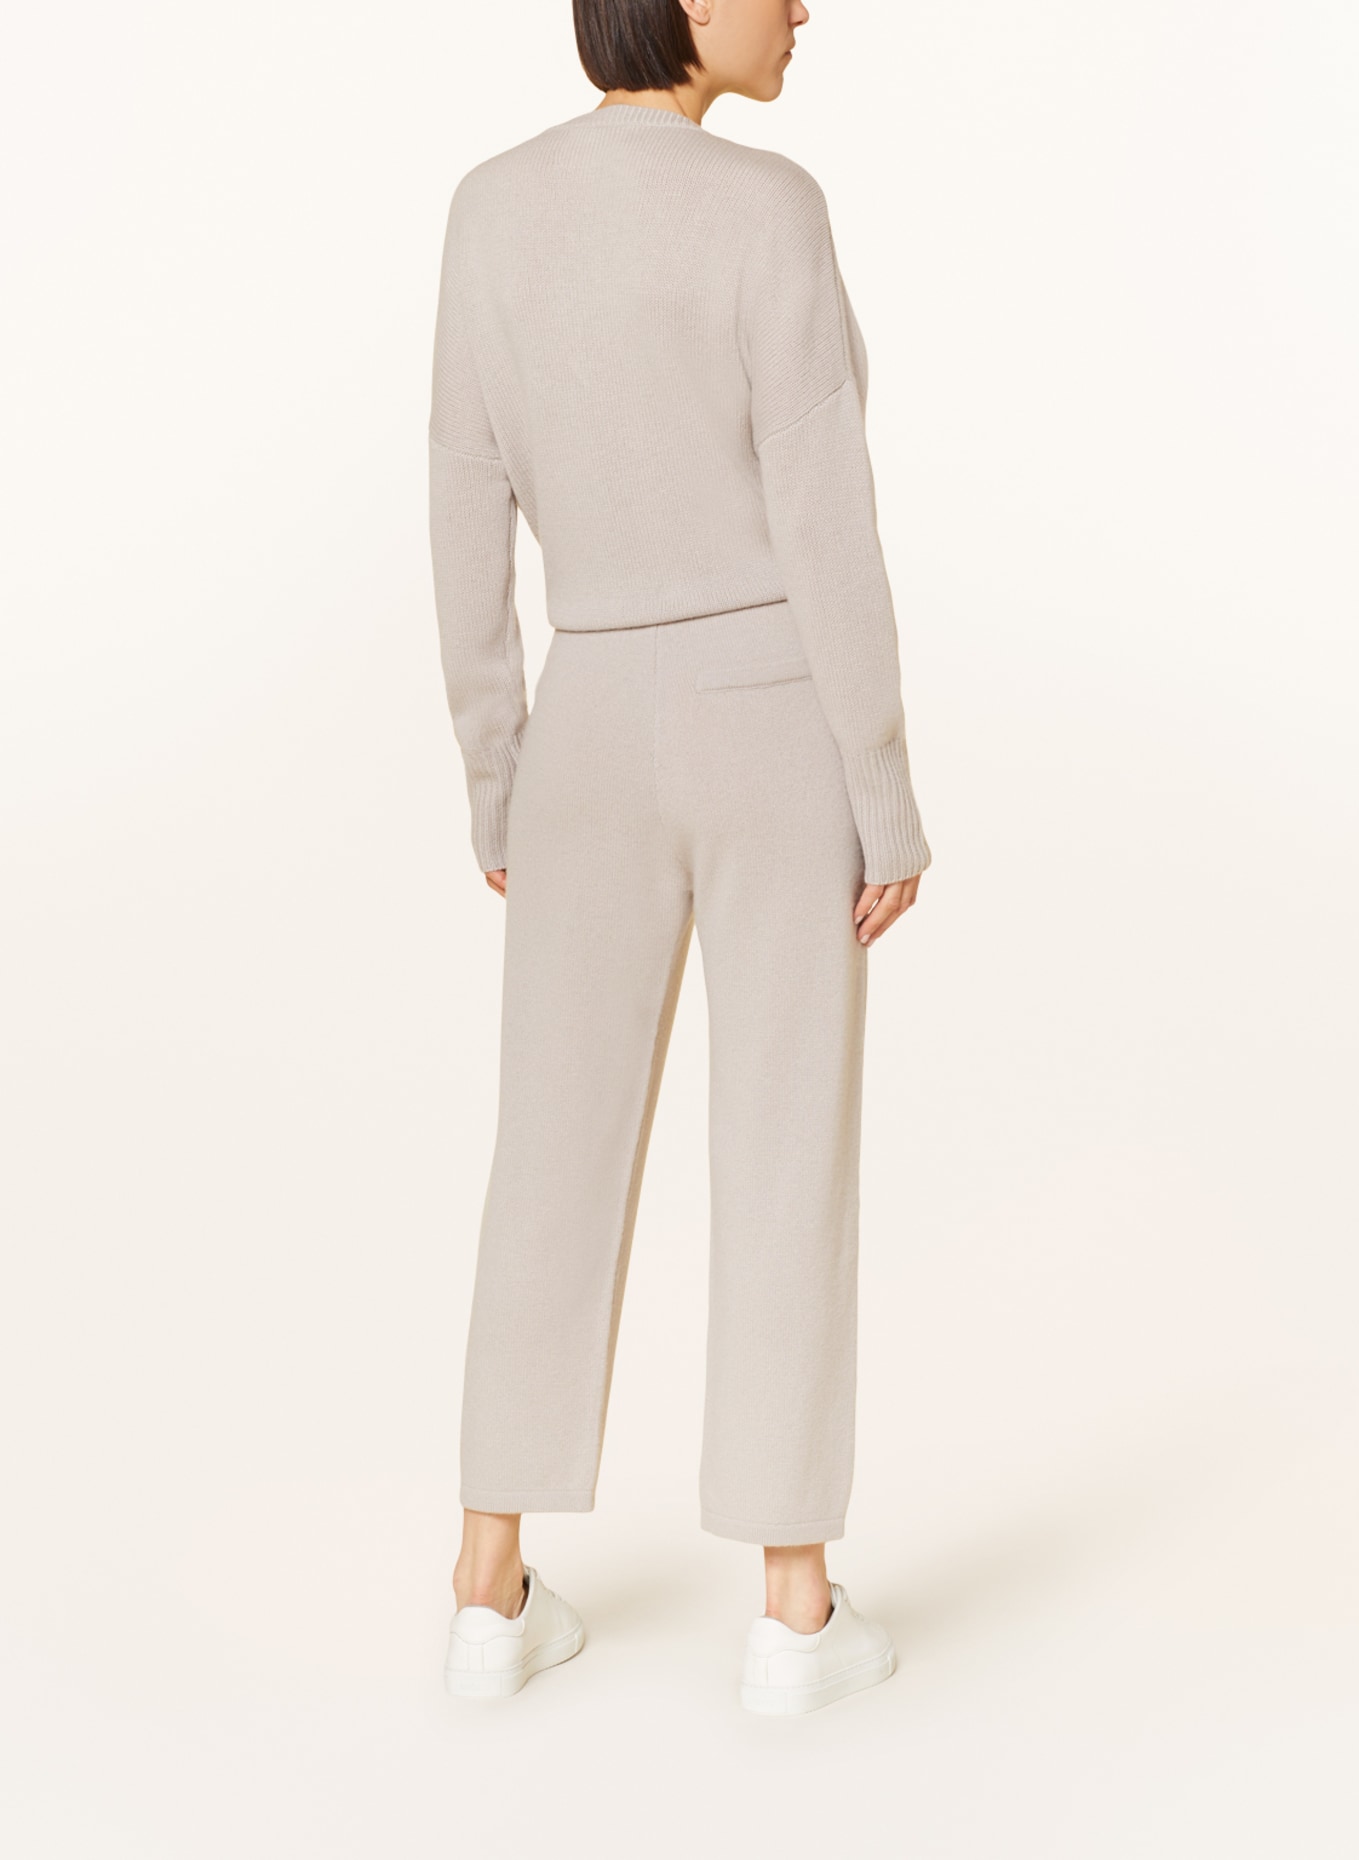 LISA YANG Knit trousers SUNDAY in jogger style in cashmere, Color: LIGHT GRAY (Image 3)